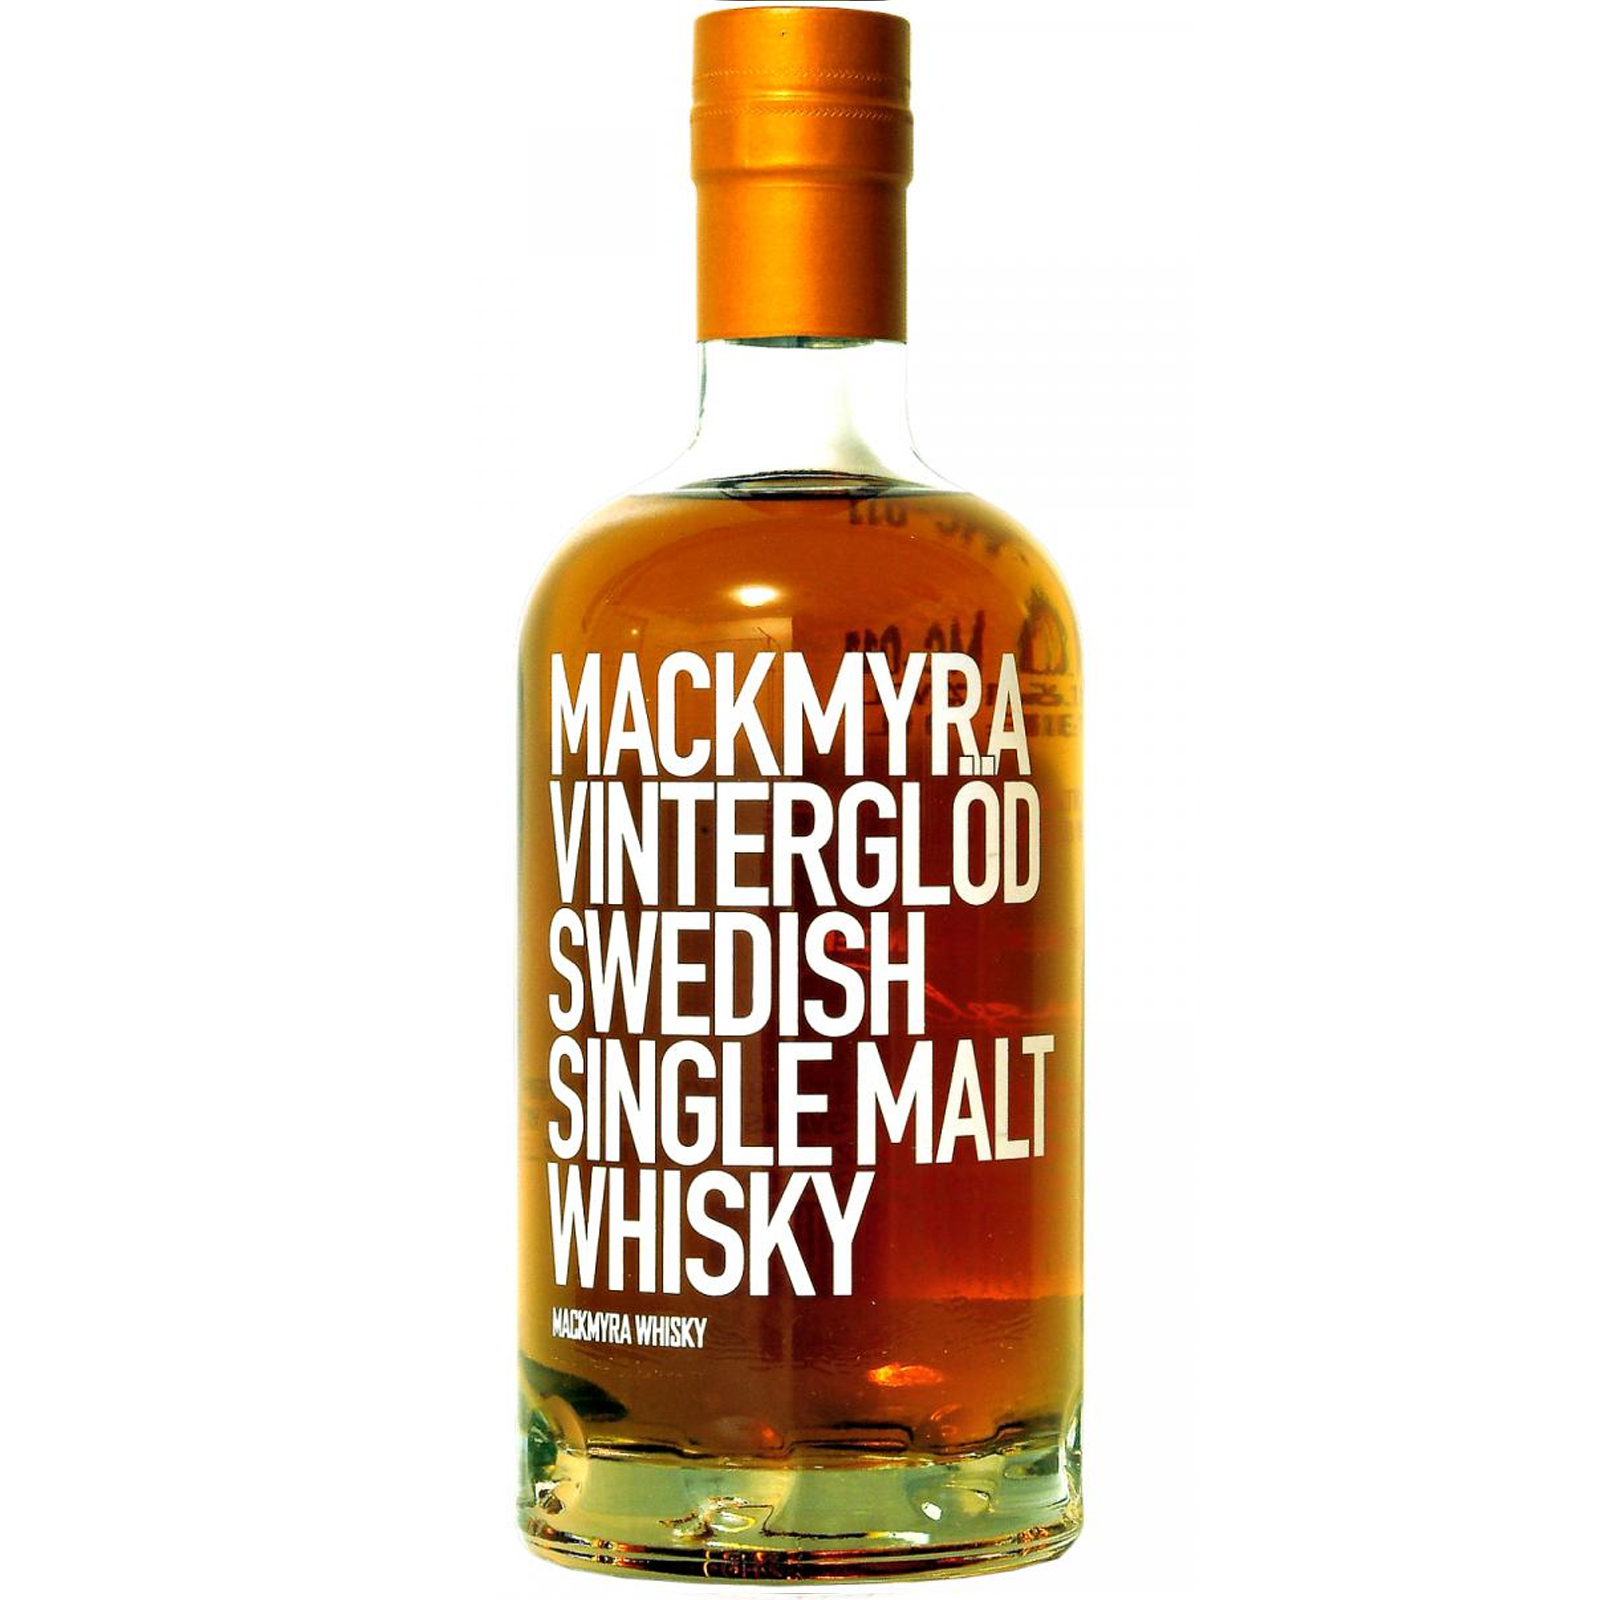 You are currently viewing Mackmyra – Vinterglod